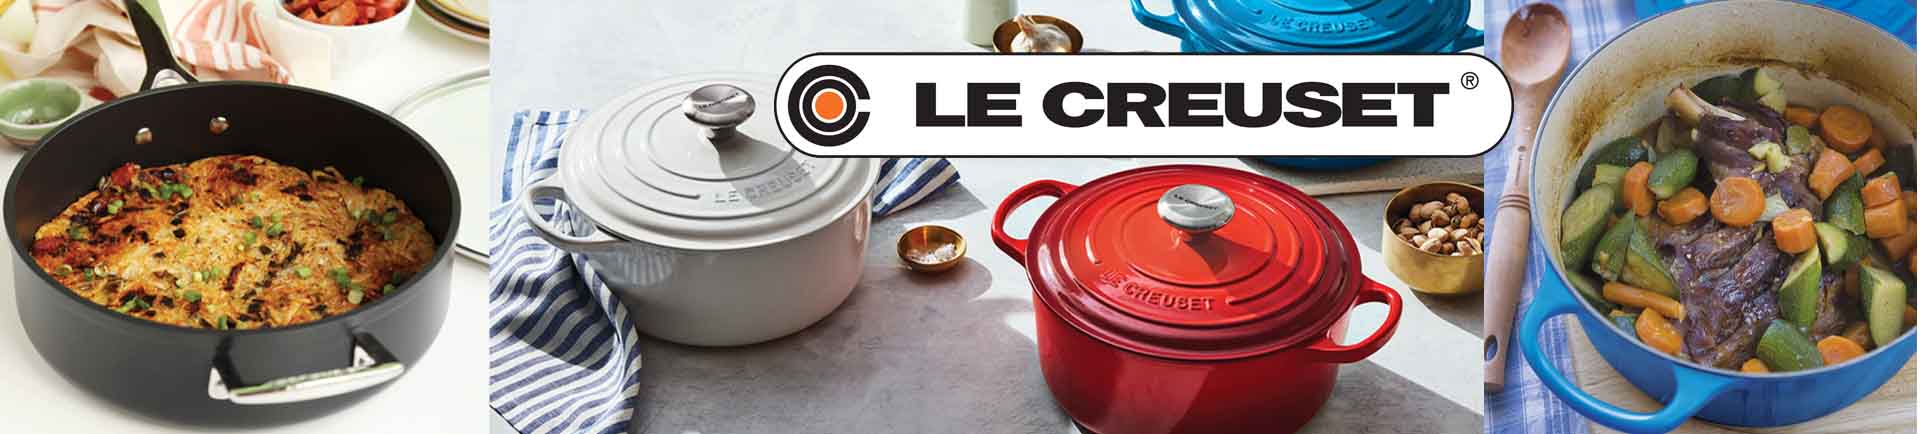 Le Creuset Products Banner